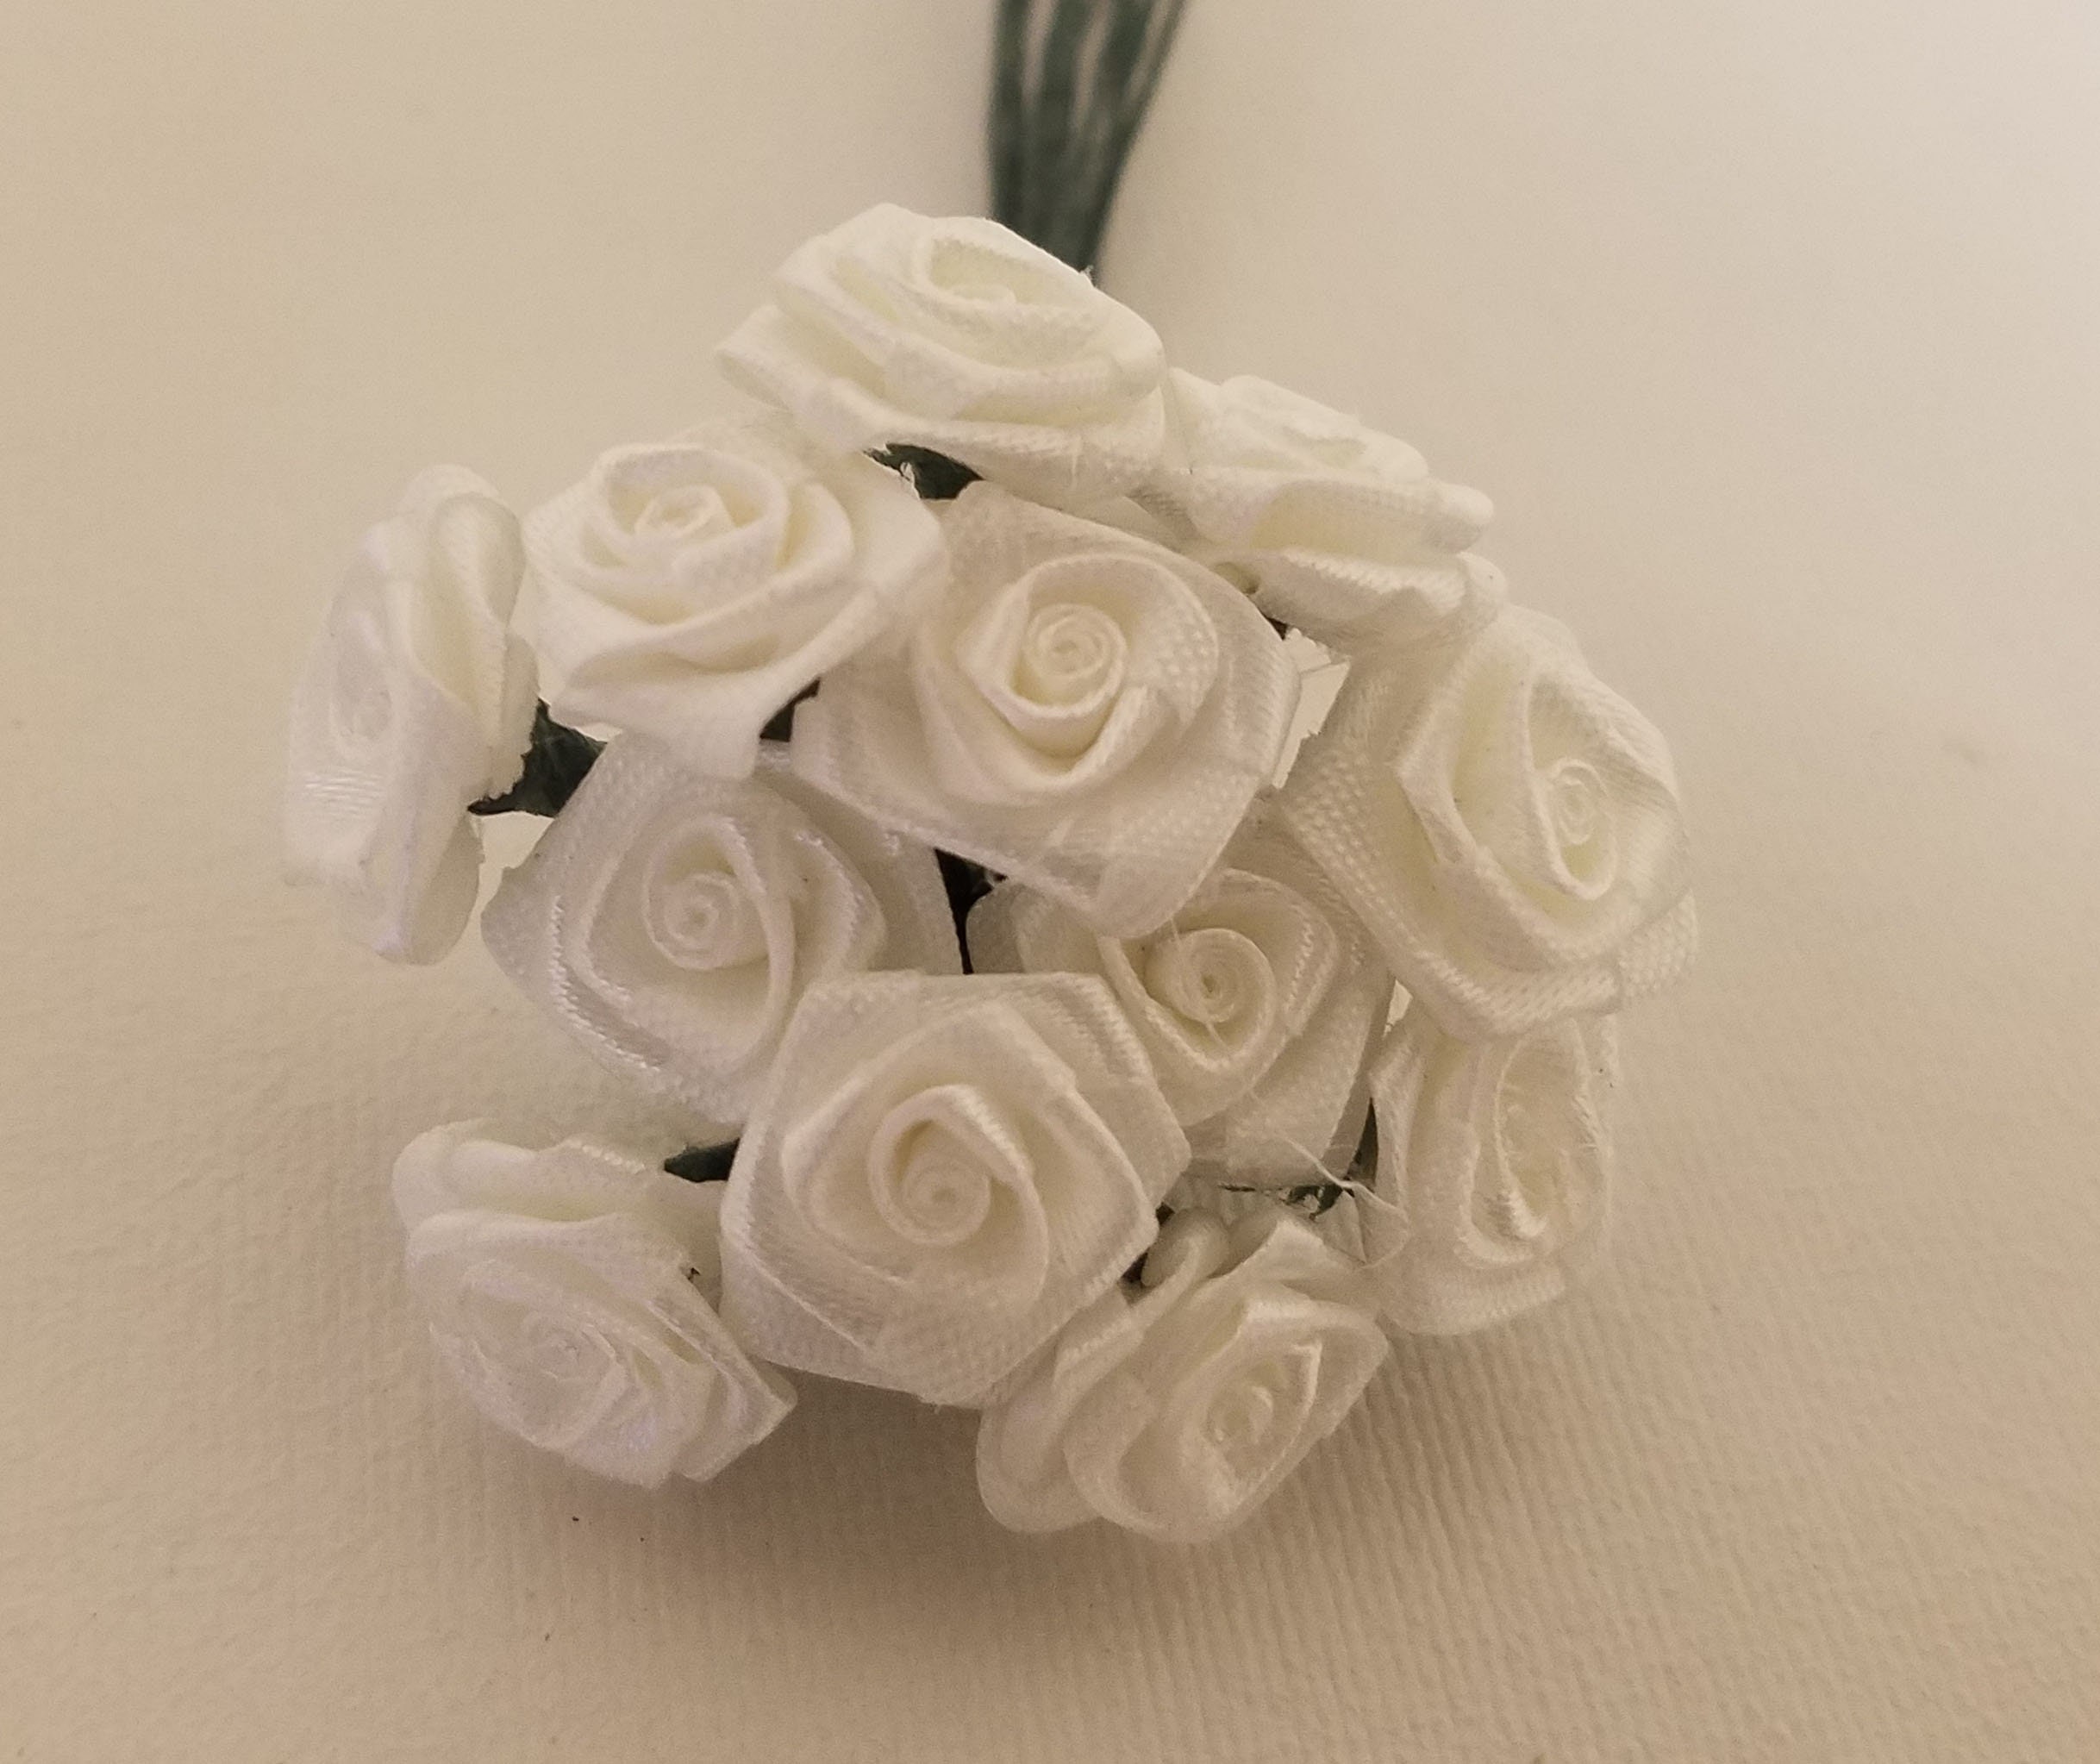 Lot 144 pcs White Satin Ribbon Roses Flowers 12mm 1/2" 1/2 Inch on Wire Stem 